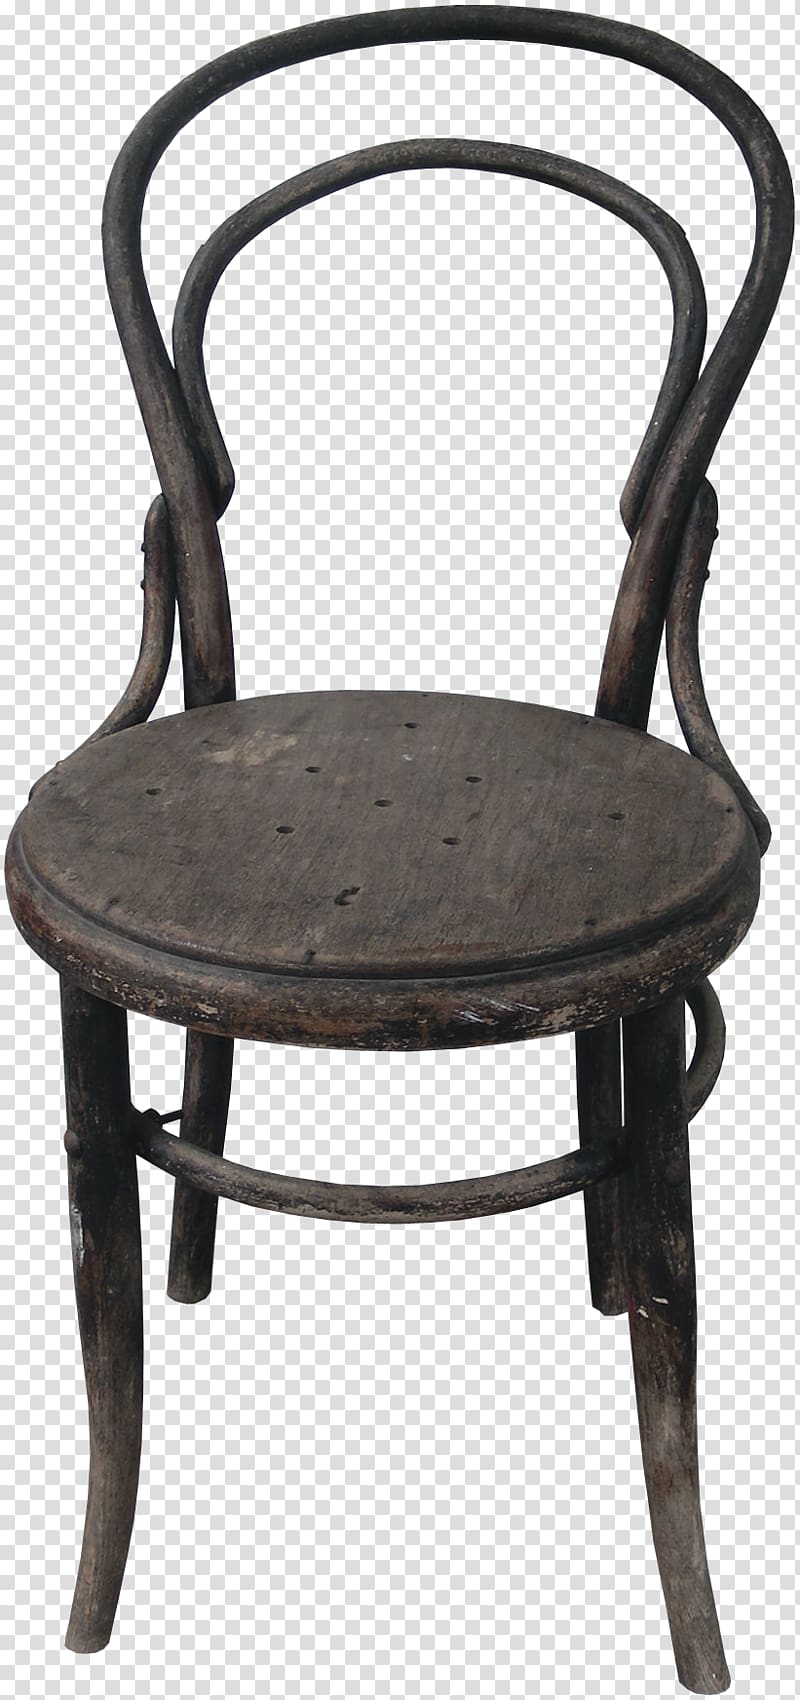 Iron chair Iron chair, Iron chair transparent background PNG clipart